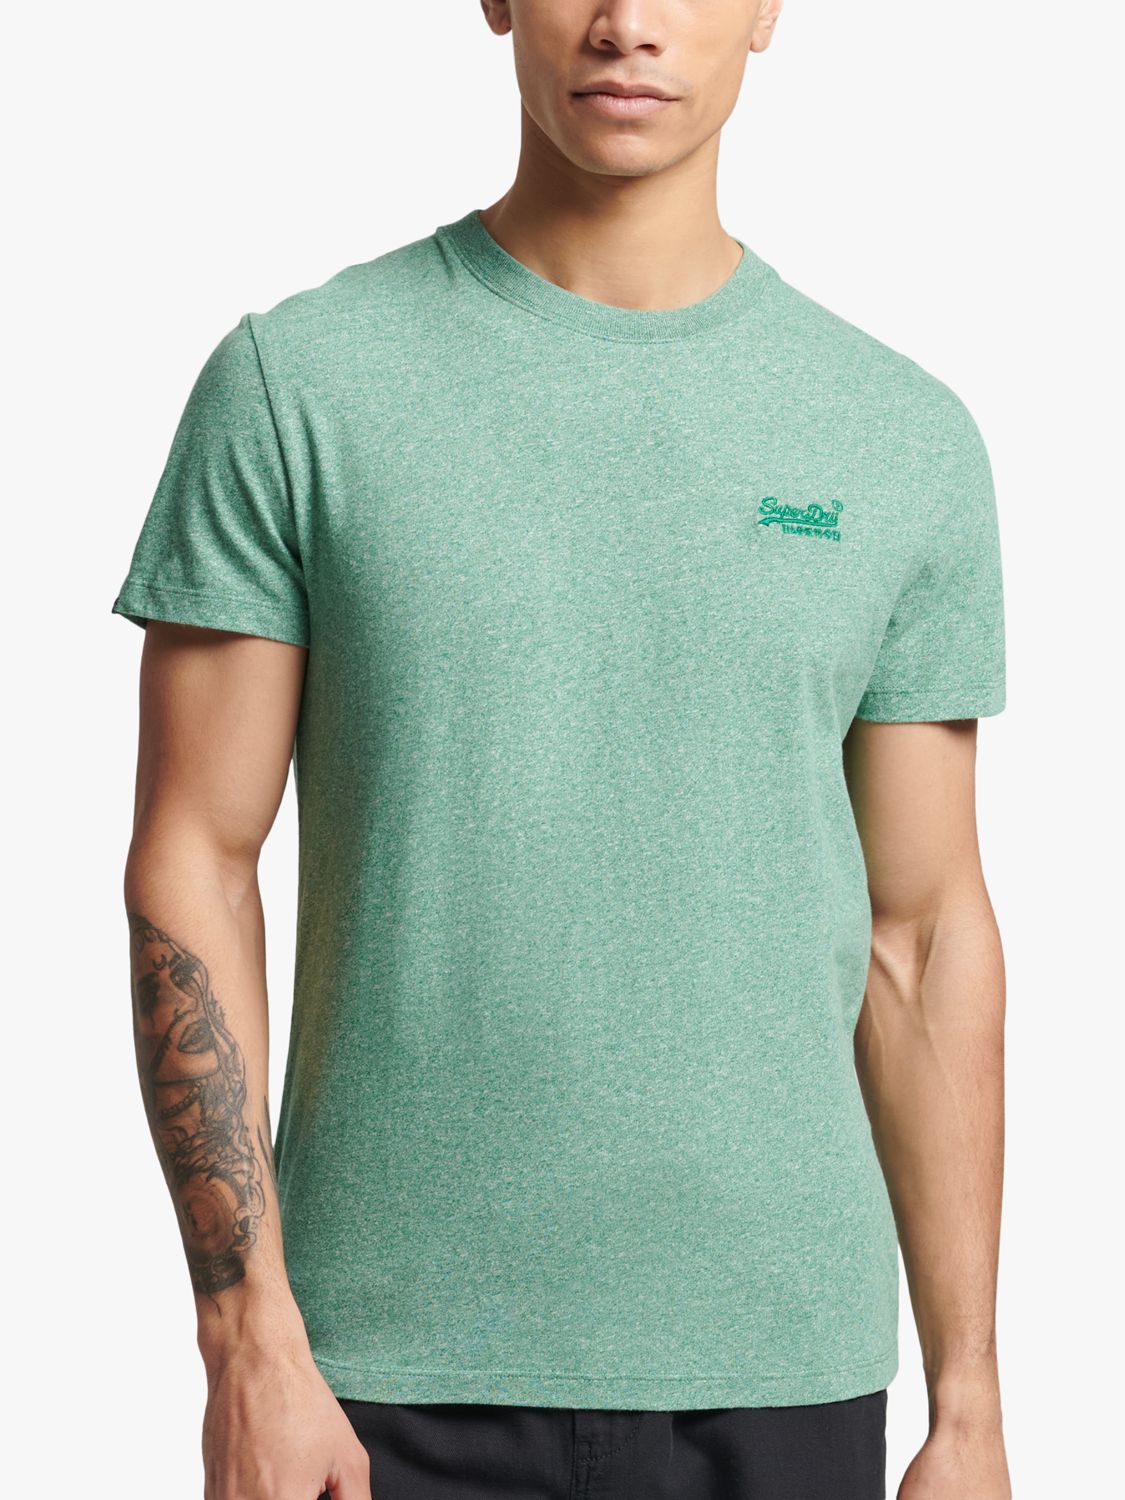 Green Vintage Lewis at Logo Embroidered Superdry T-Shirt, Partners Cotton & Organic Bright Grit John